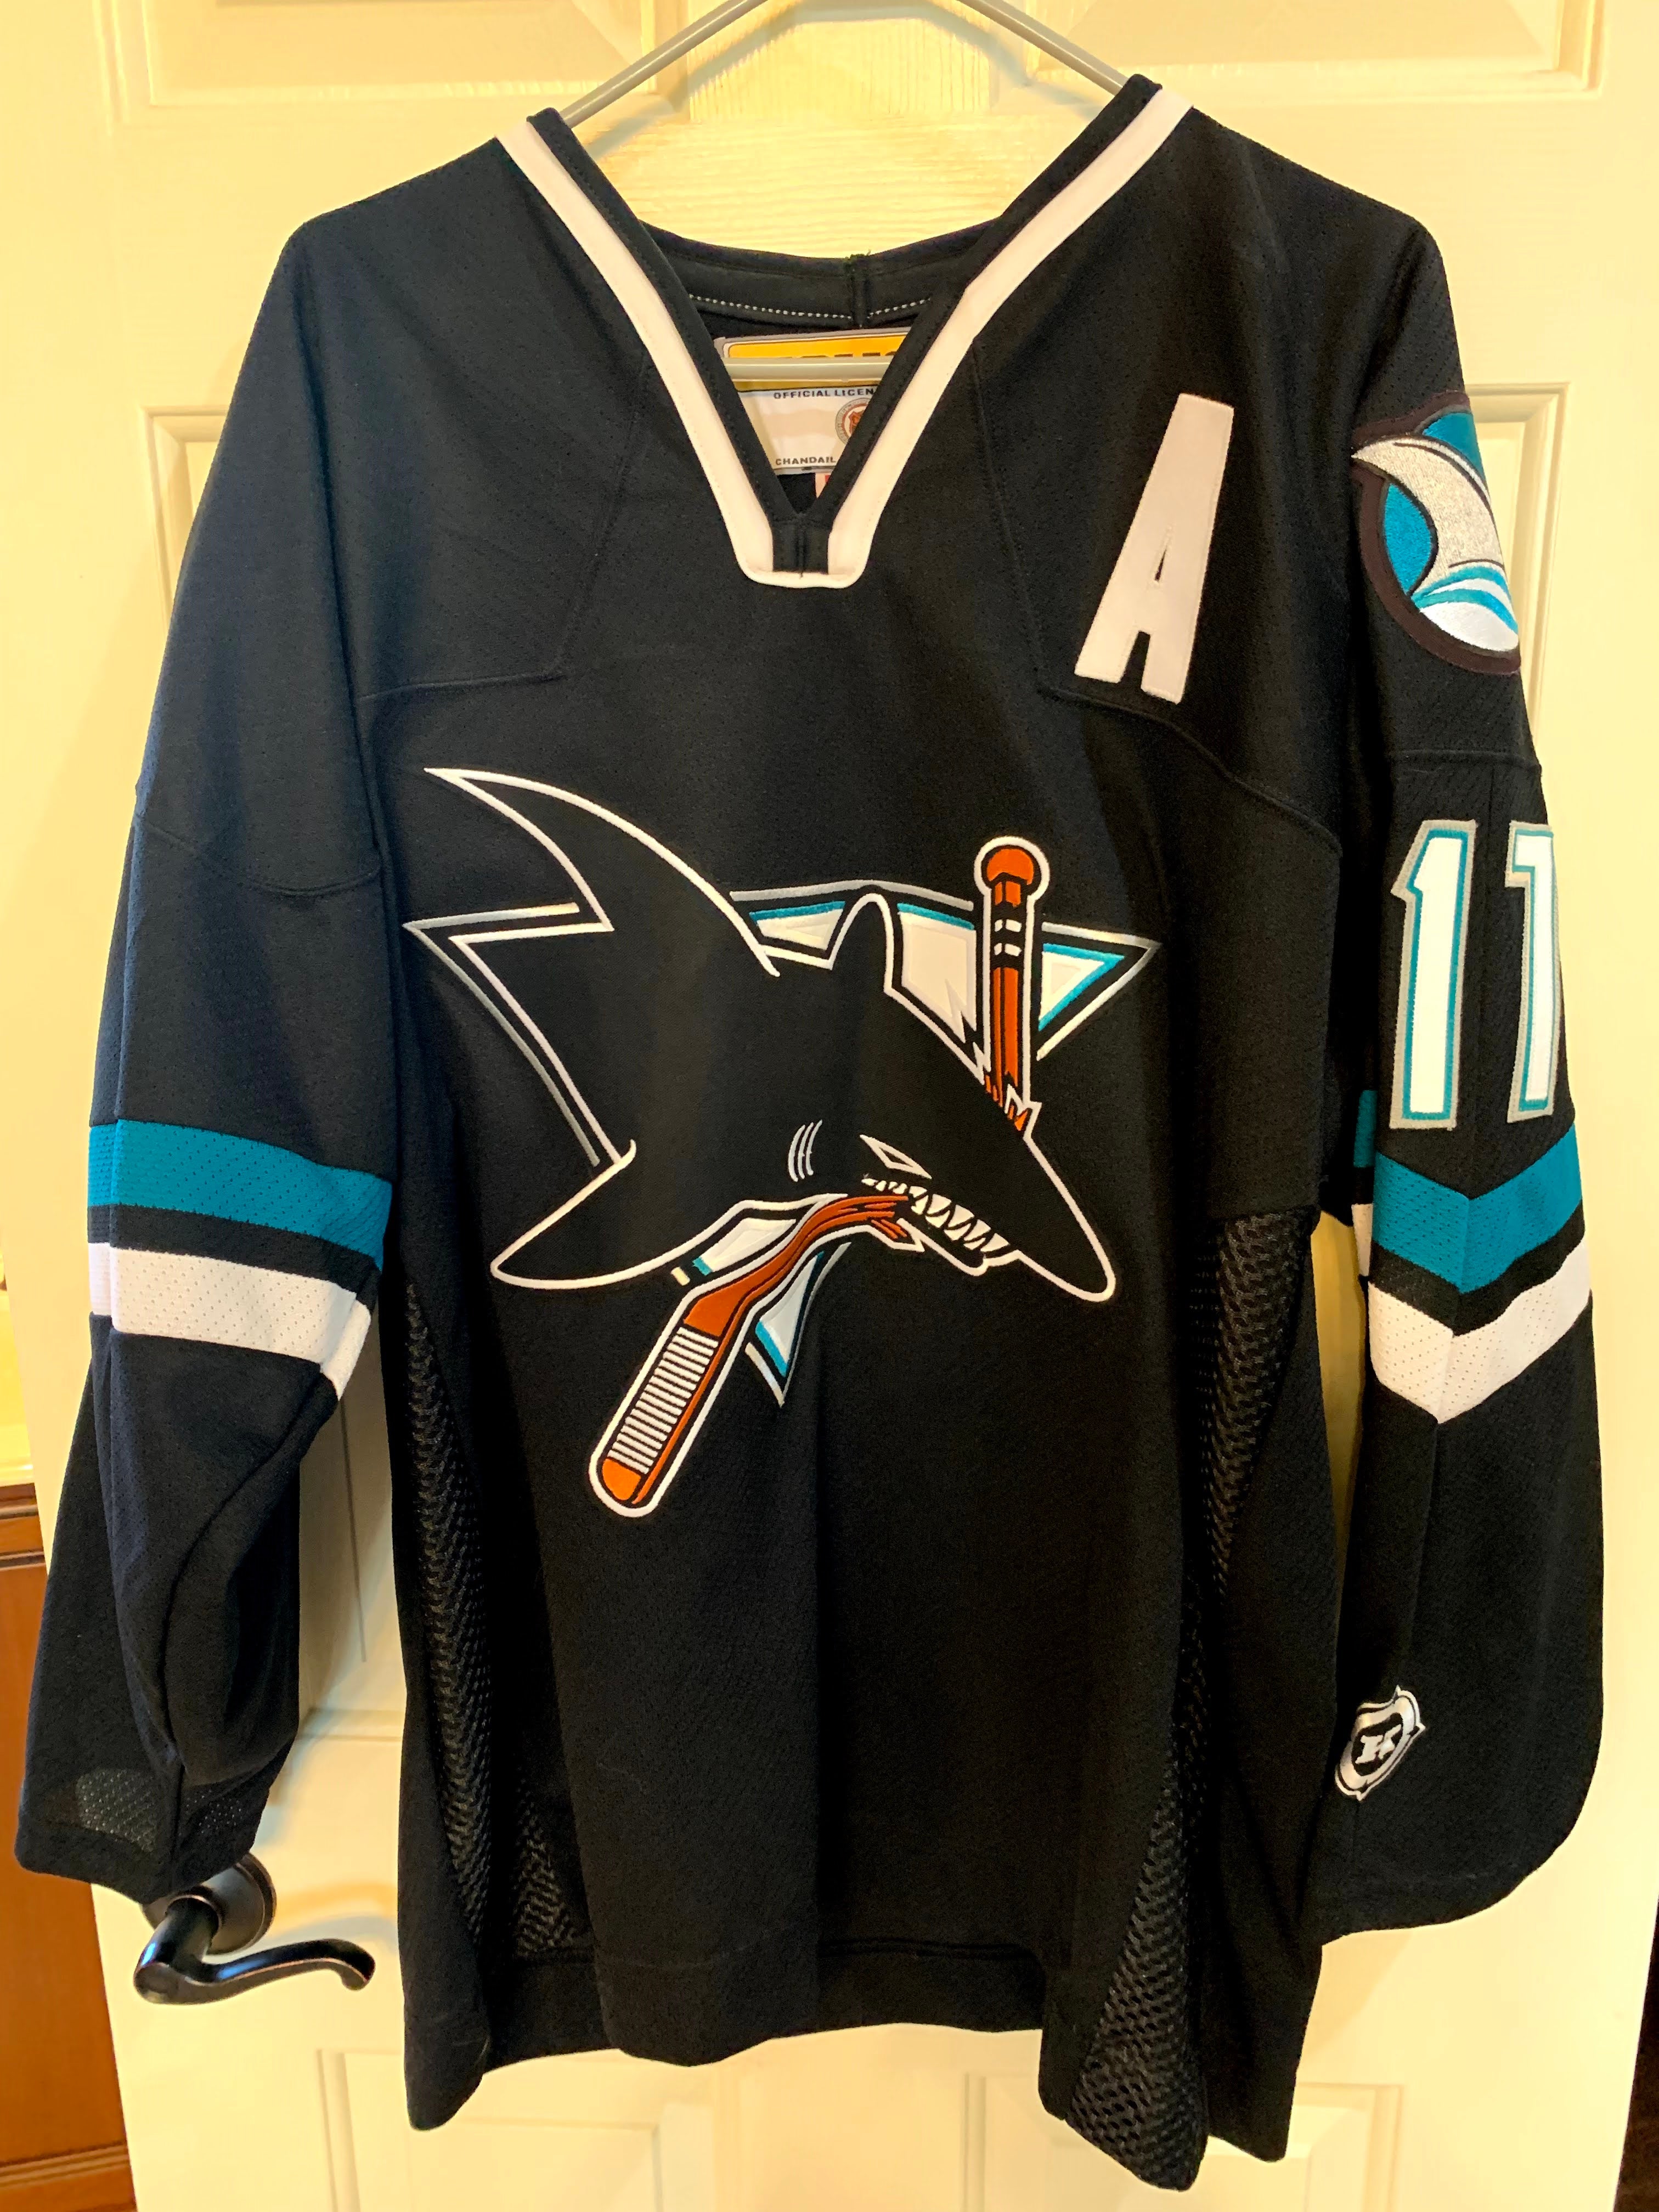 San Jose Sharks Store - Gift Store in Central San Jose